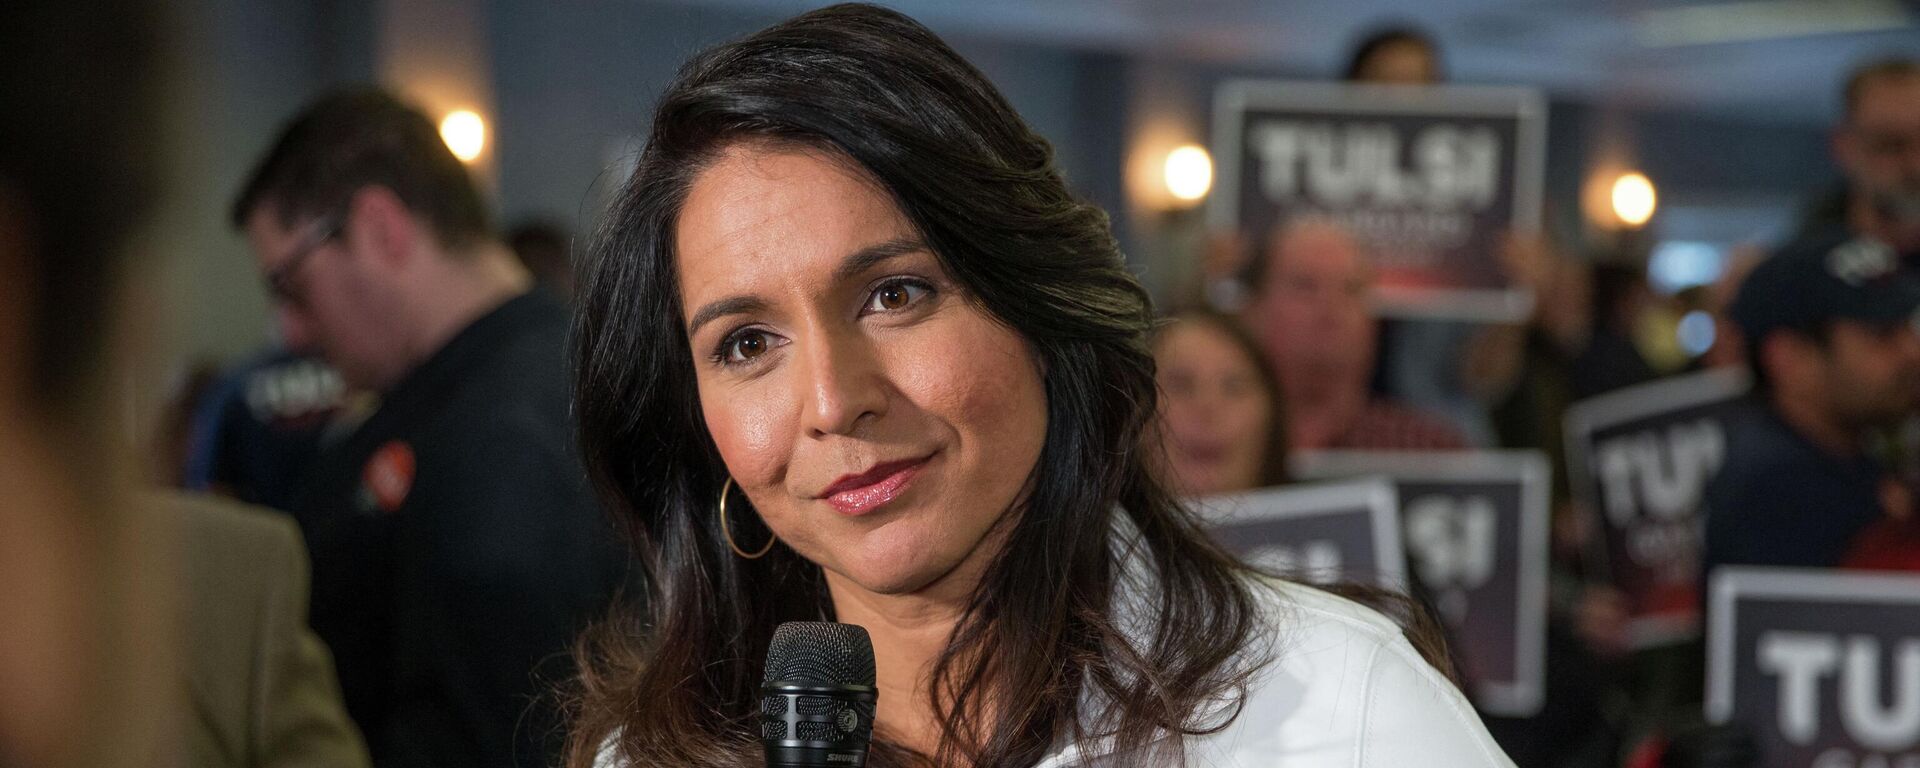 Democratic presidential candidate Rep. Tulsi Gabbard (D-HI) answers media questions following a campaign event on February 9, 2020 in Portsmouth, New Hampshire - Sputnik International, 1920, 02.05.2022